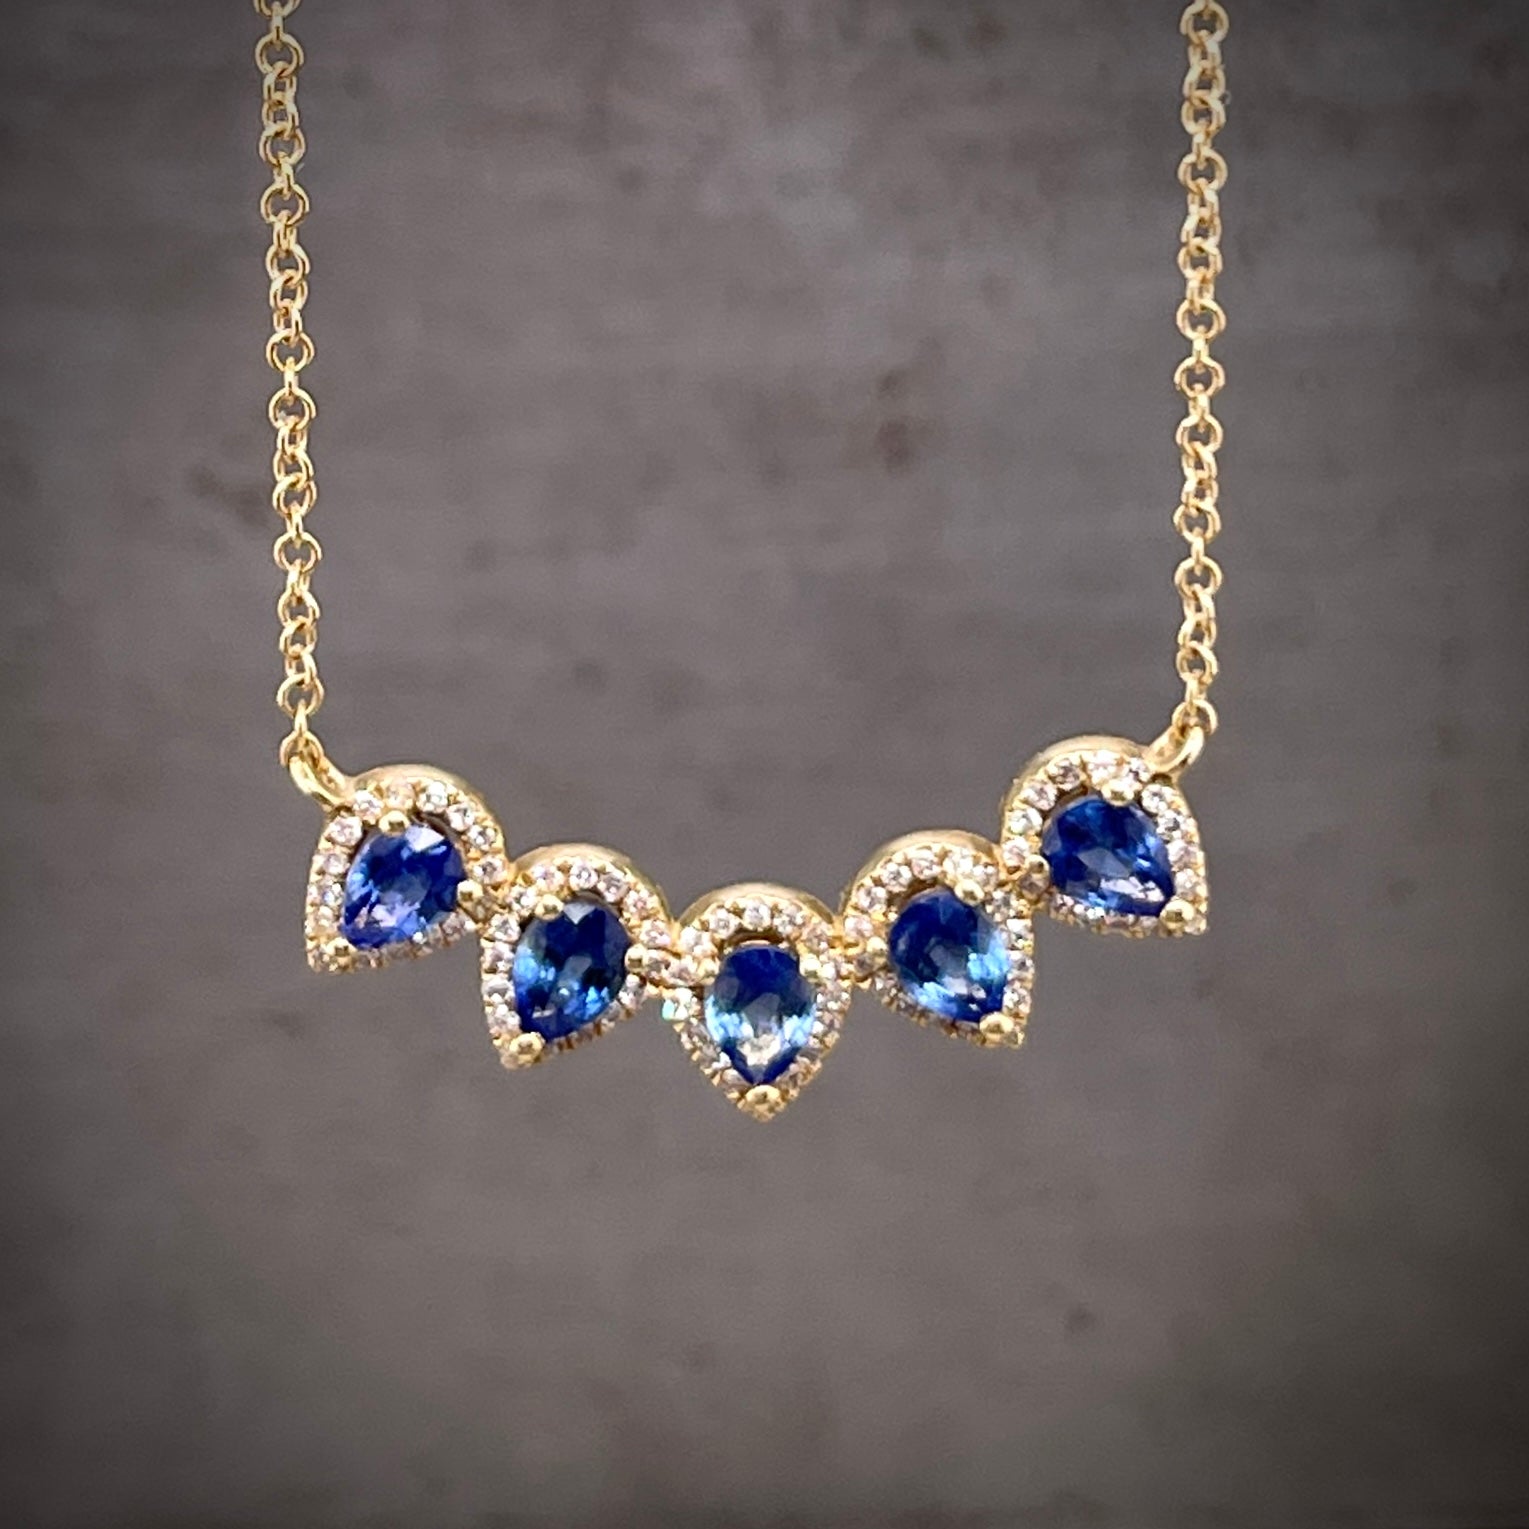 Close up view of pendant on pear and sapphire diamond necklace. Features 5 pear cut blue sapphires that create an upward curved line with their tips pointing south. Surrounding each sapphire is a halo of small round brilliant diamonds.